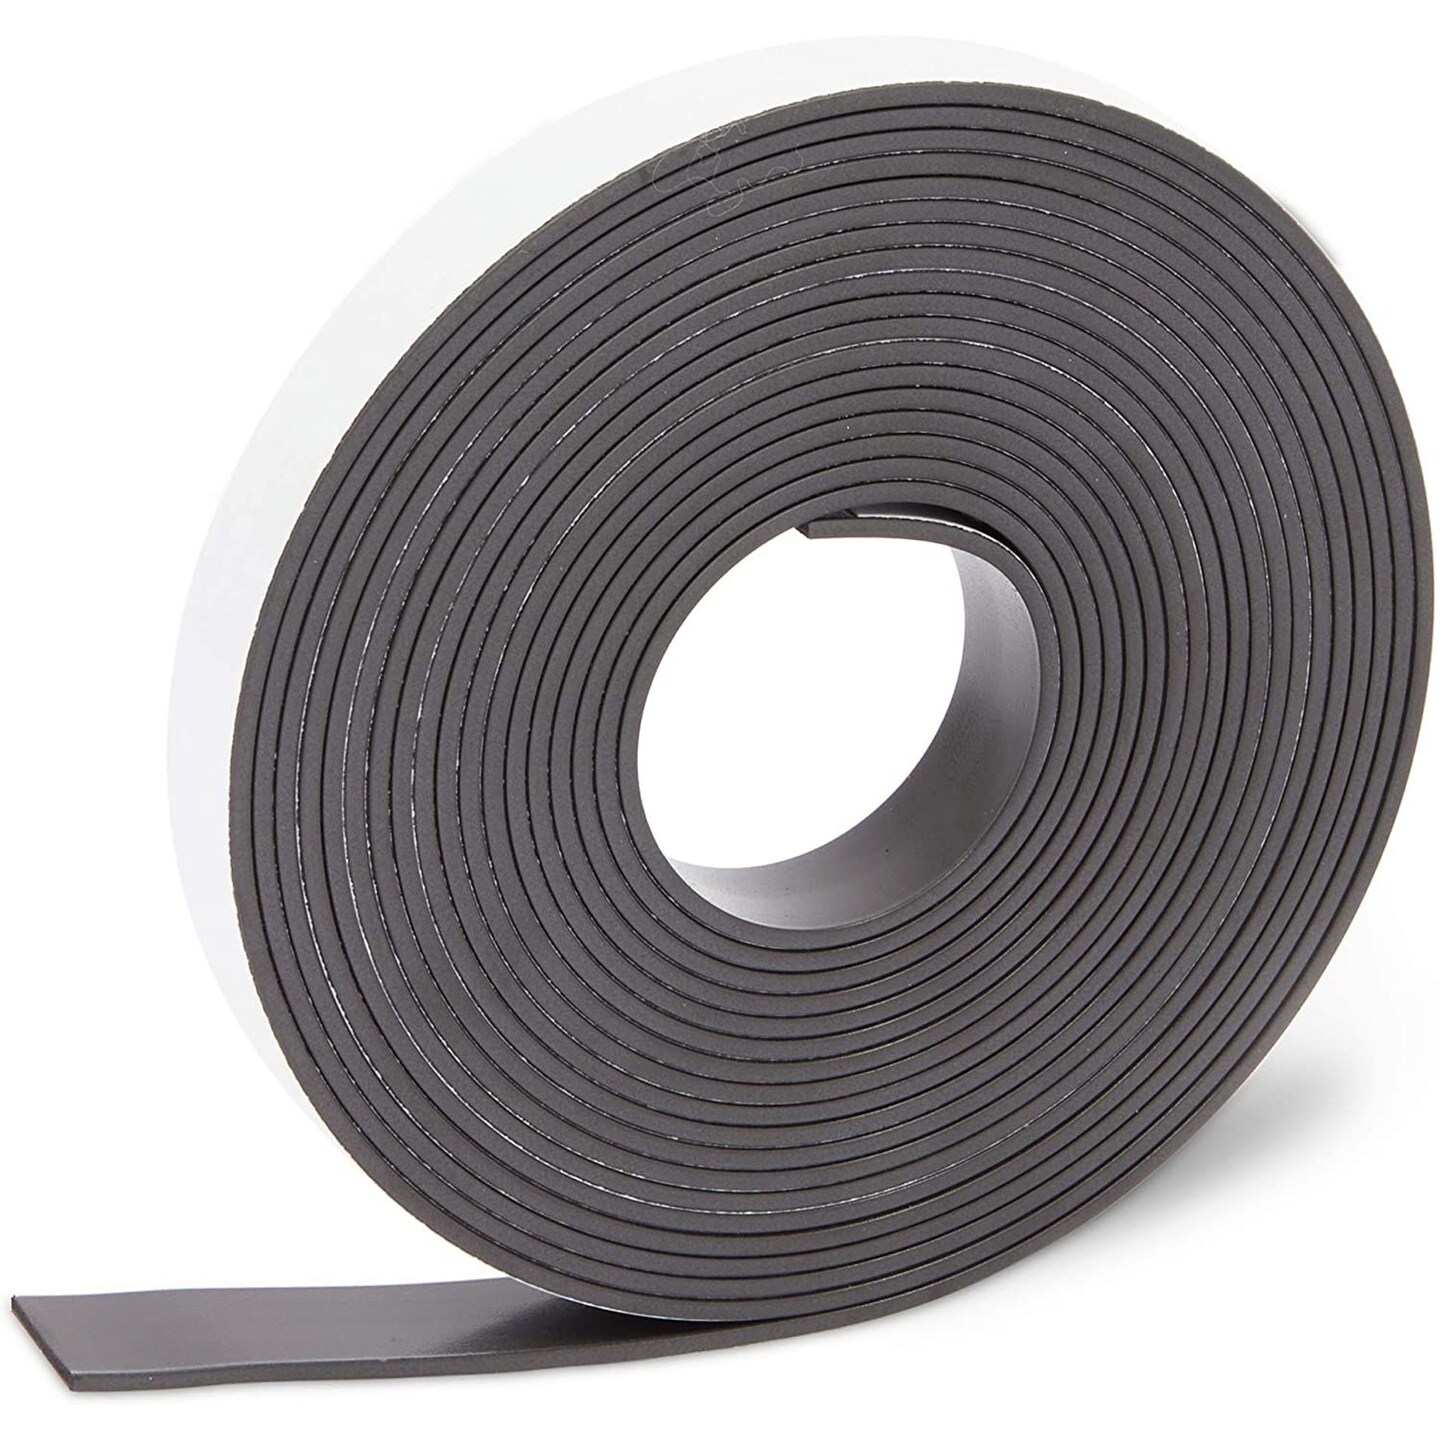 Magnetic Strips  Adhesive Strip Magnets